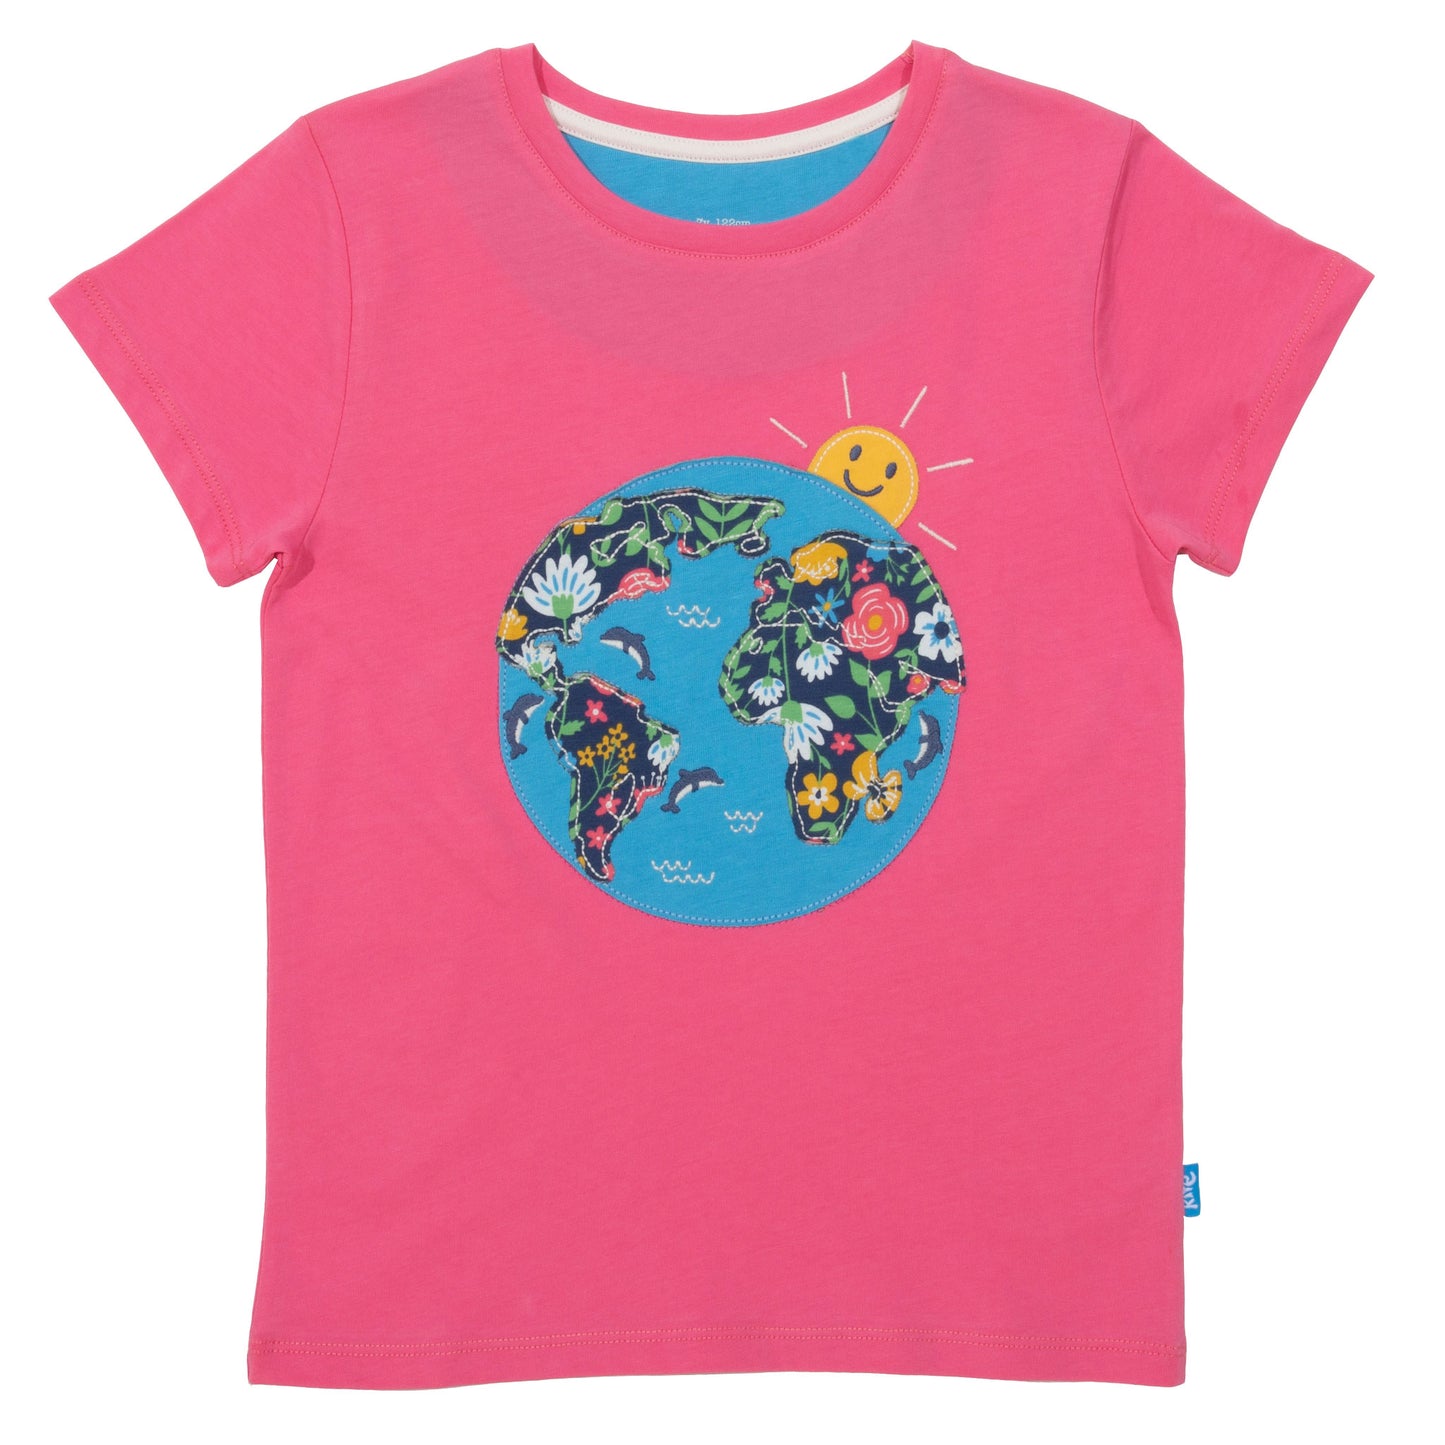 Planet dolphin t-shirt